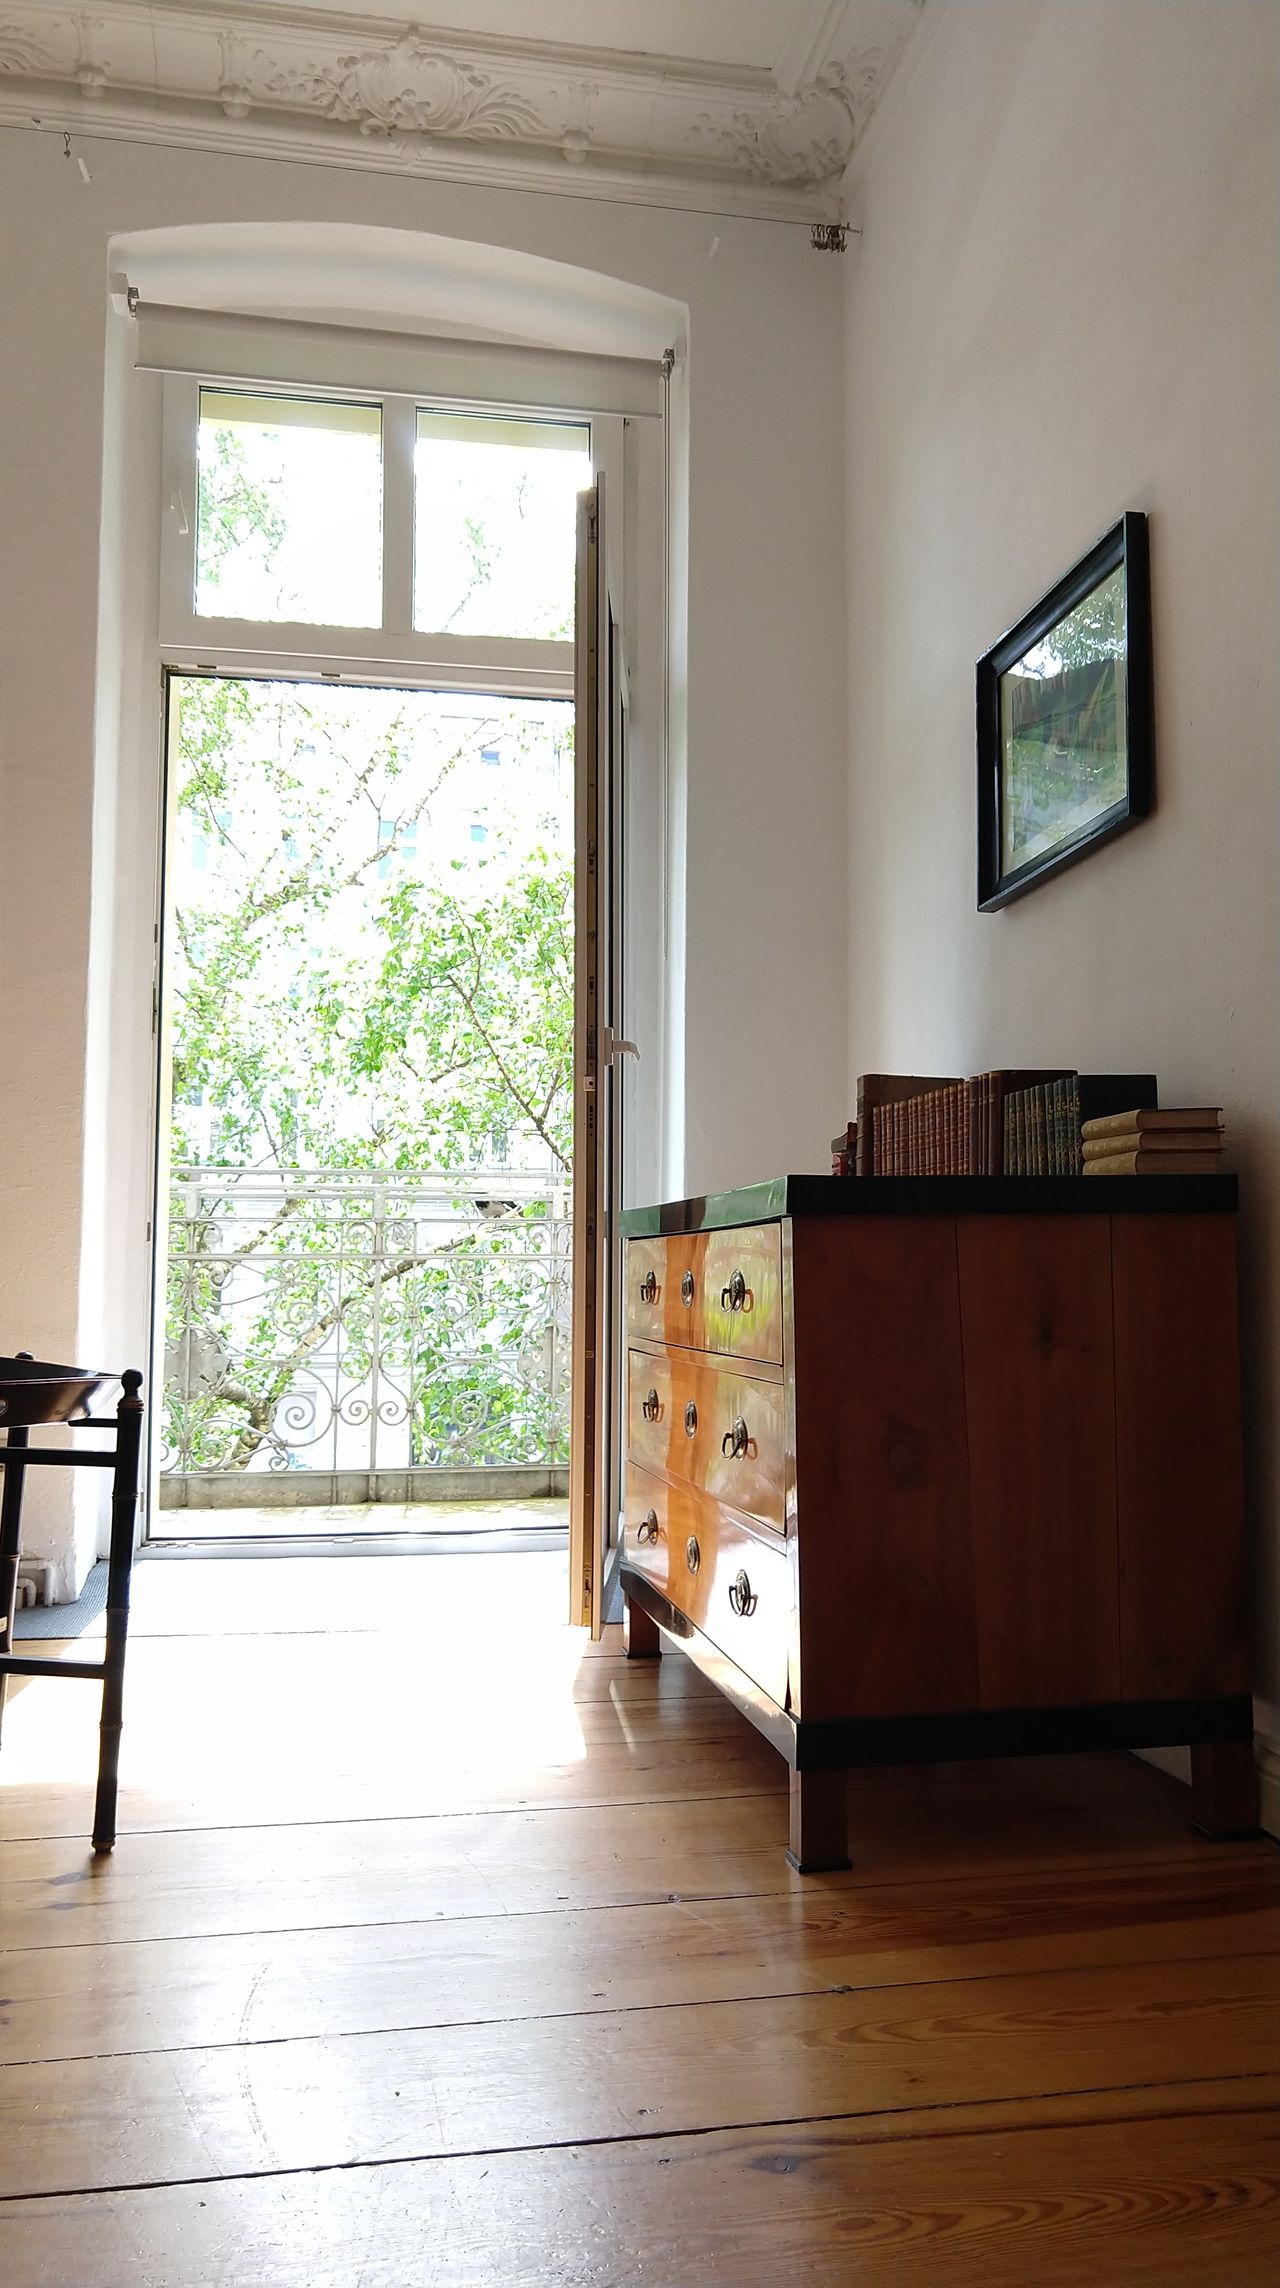 Cozy apartment with living room, balcony, bedroom, bathroom, kitchen in an old building in Pankow, Berlin